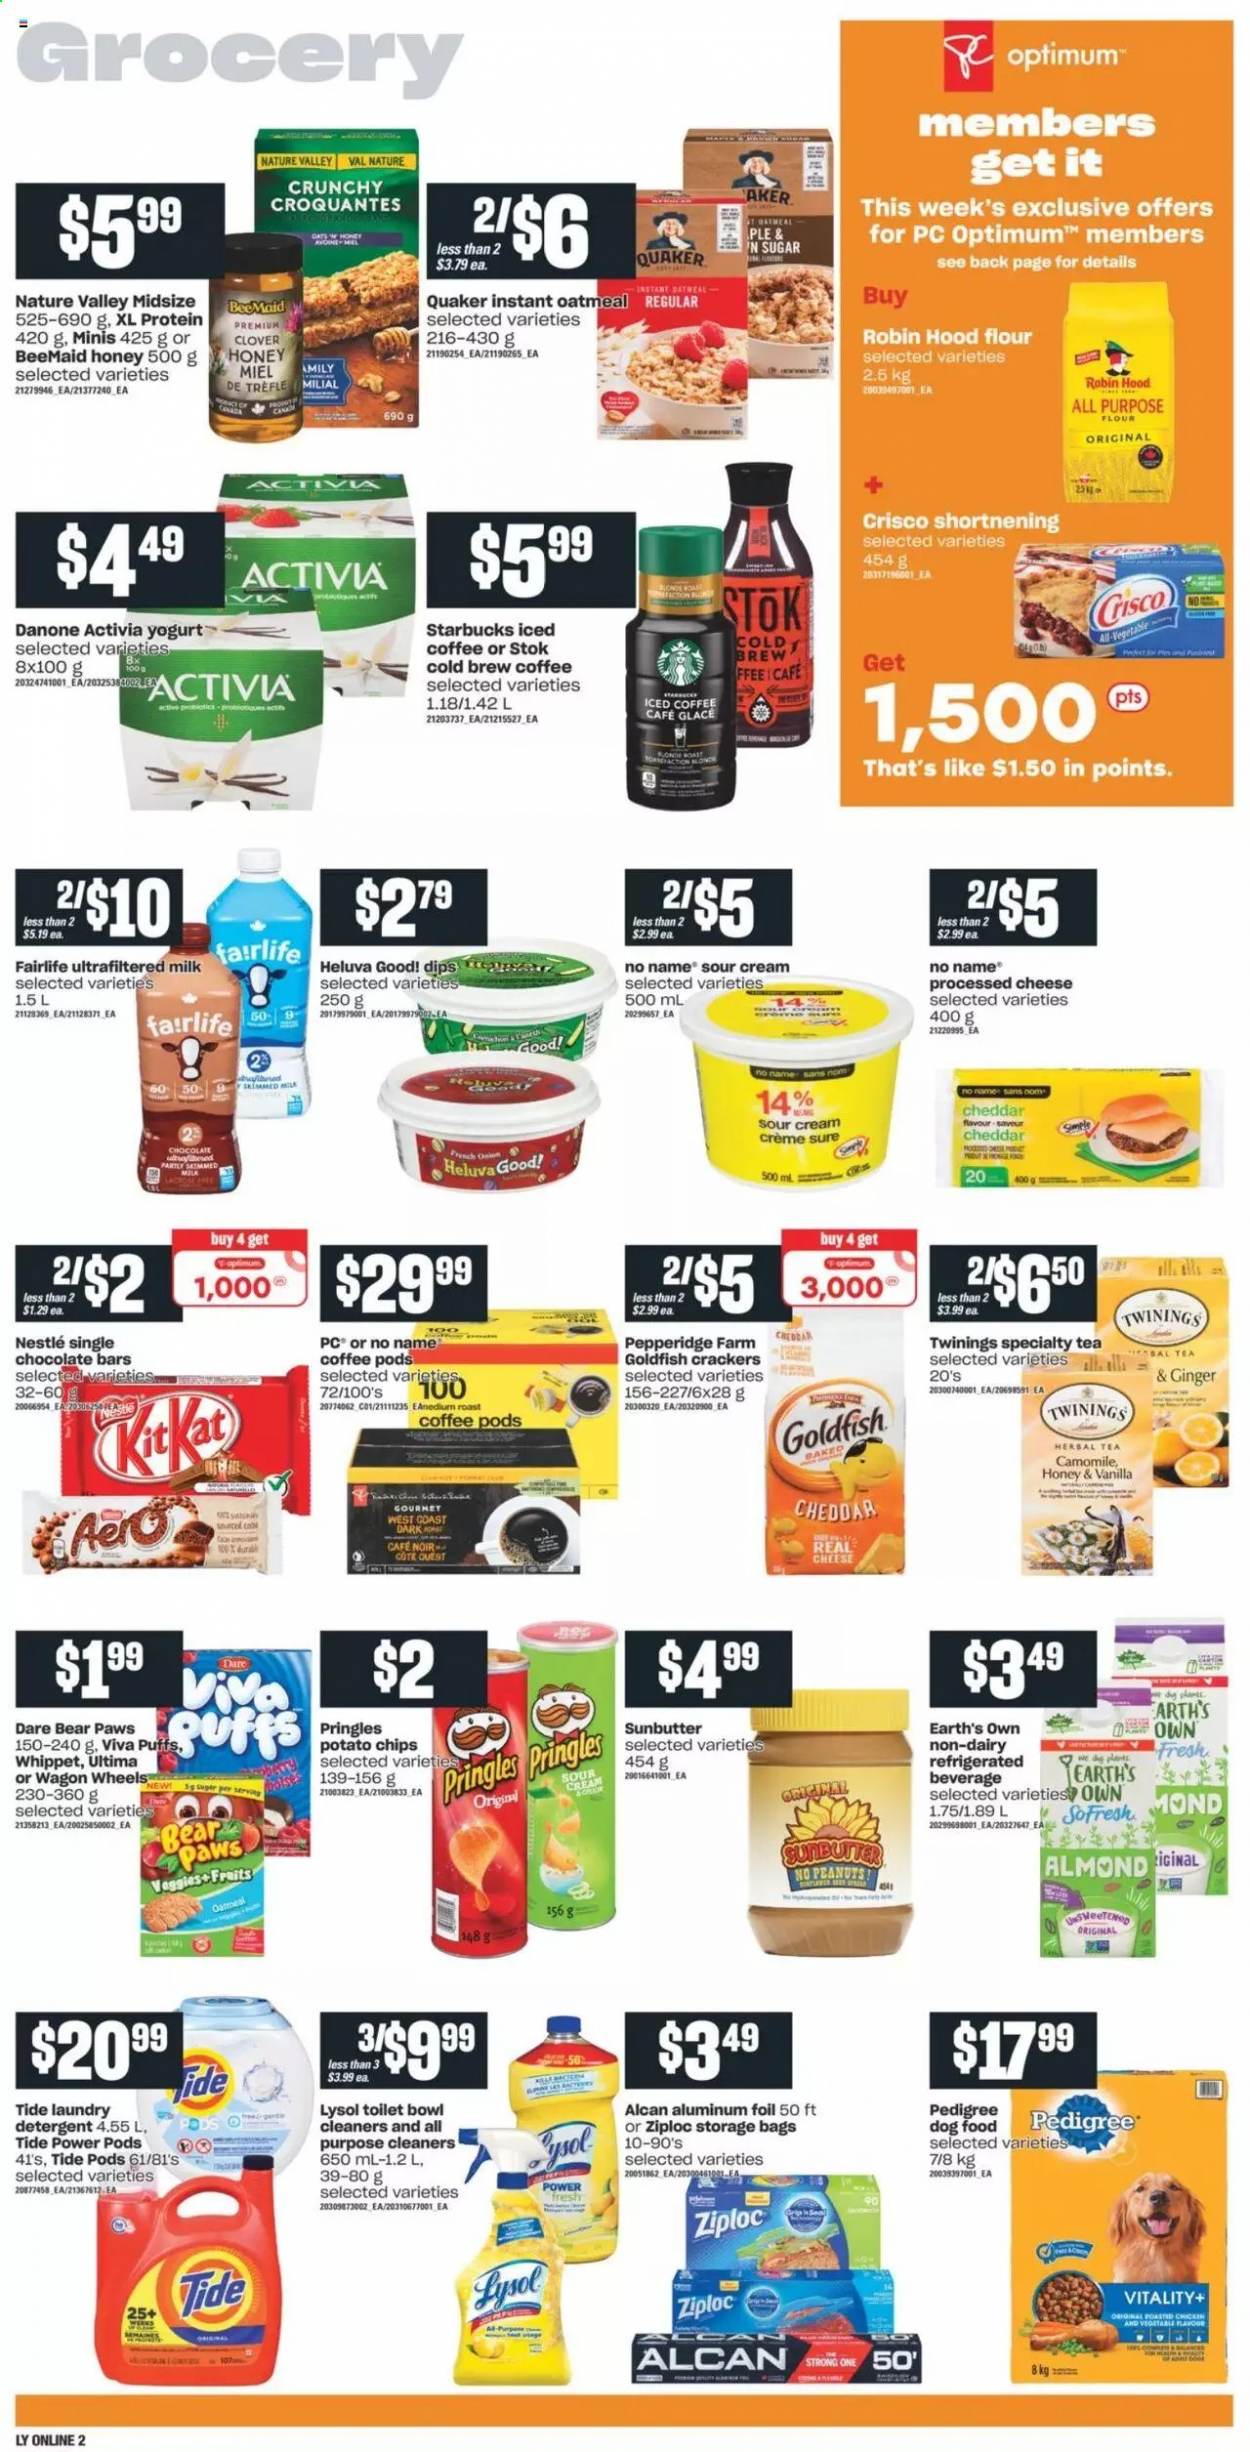 thumbnail - Independent Flyer - August 26, 2021 - September 01, 2021 - Sales products - puffs, No Name, Quaker, cheese, yoghurt, Clover, Activia, milk, sour cream, crackers, chocolate bar, potato chips, Pringles, Goldfish, Crisco, flour, sugar, oatmeal, Nature Valley, honey, peanuts, iced coffee, herbal tea, Twinings, coffee pods, Starbucks, Ron Pelicano, Lysol, Tide, laundry detergent, Sure, Ziploc, storage bag, plate, aluminium foil, Paws, animal food, dog food, Optimum, Pedigree, wagon, Danone, Nestlé, chips. Page 6.